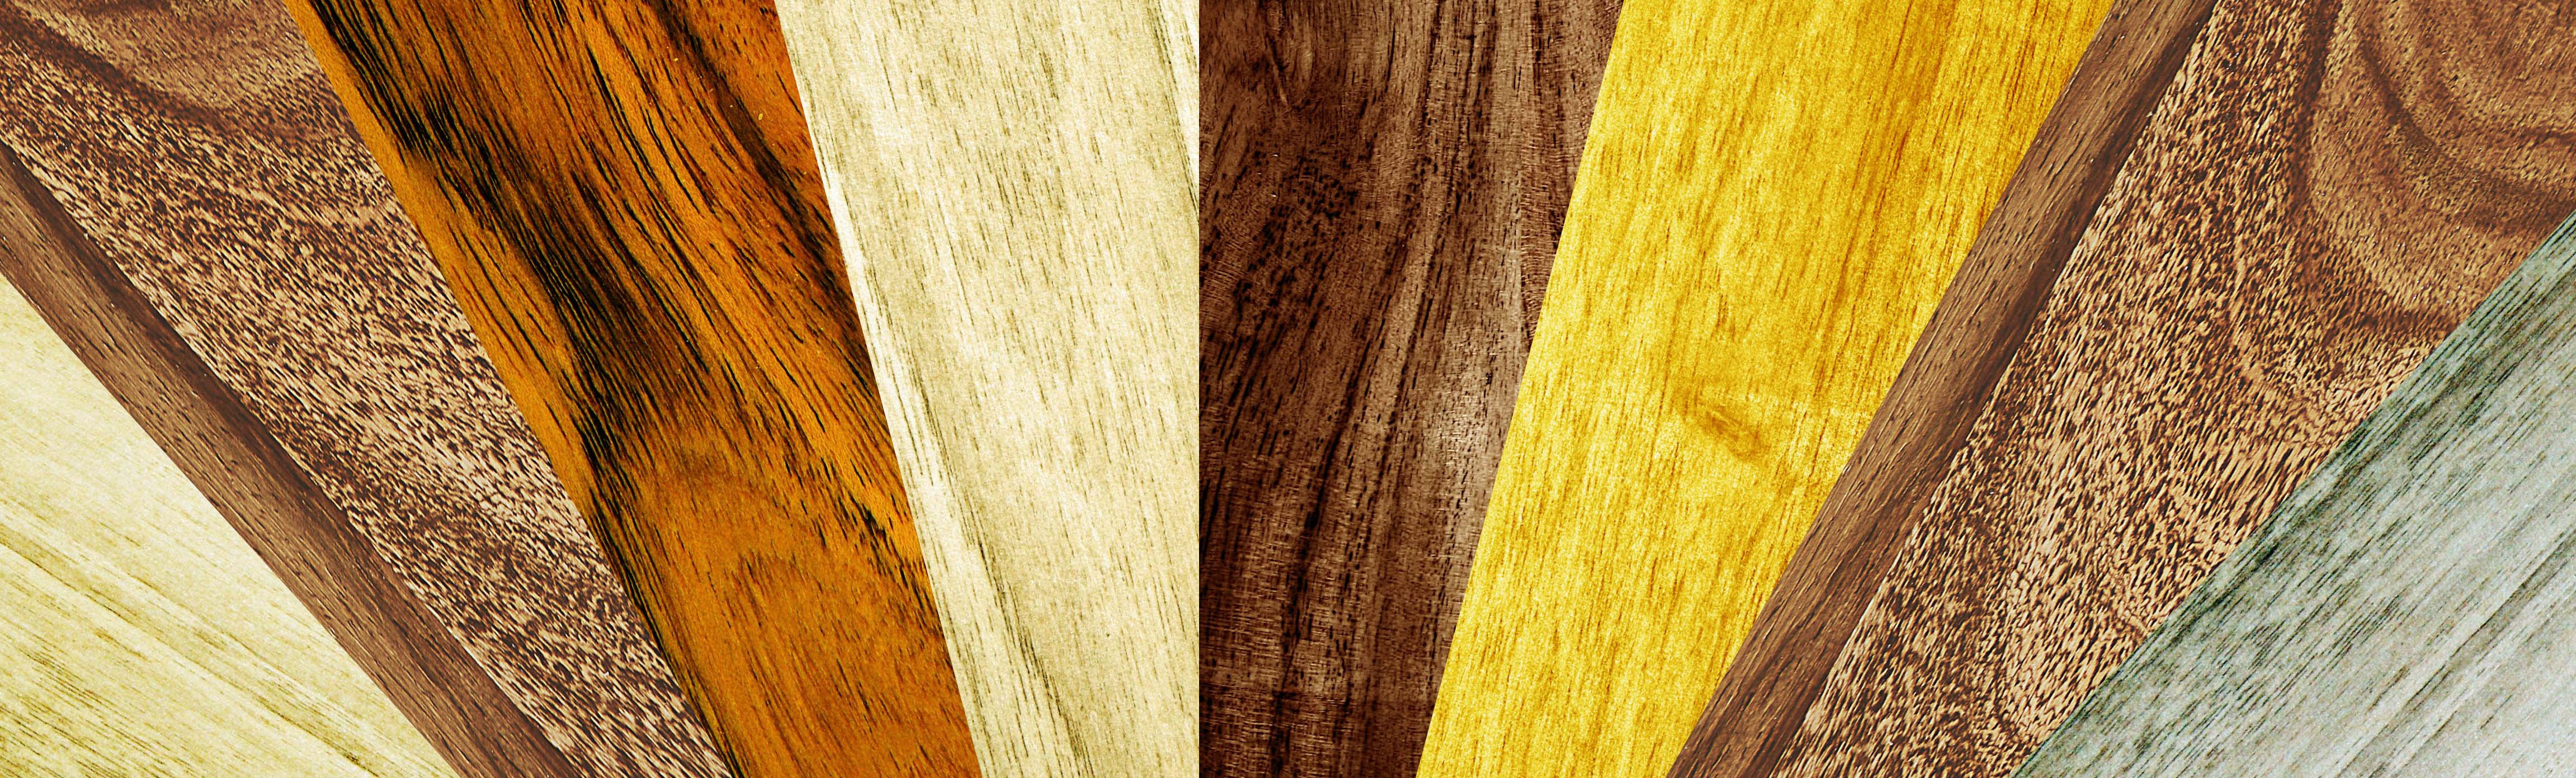 High-Performance Resins for Industrial Wood - EPS® 2400 Series